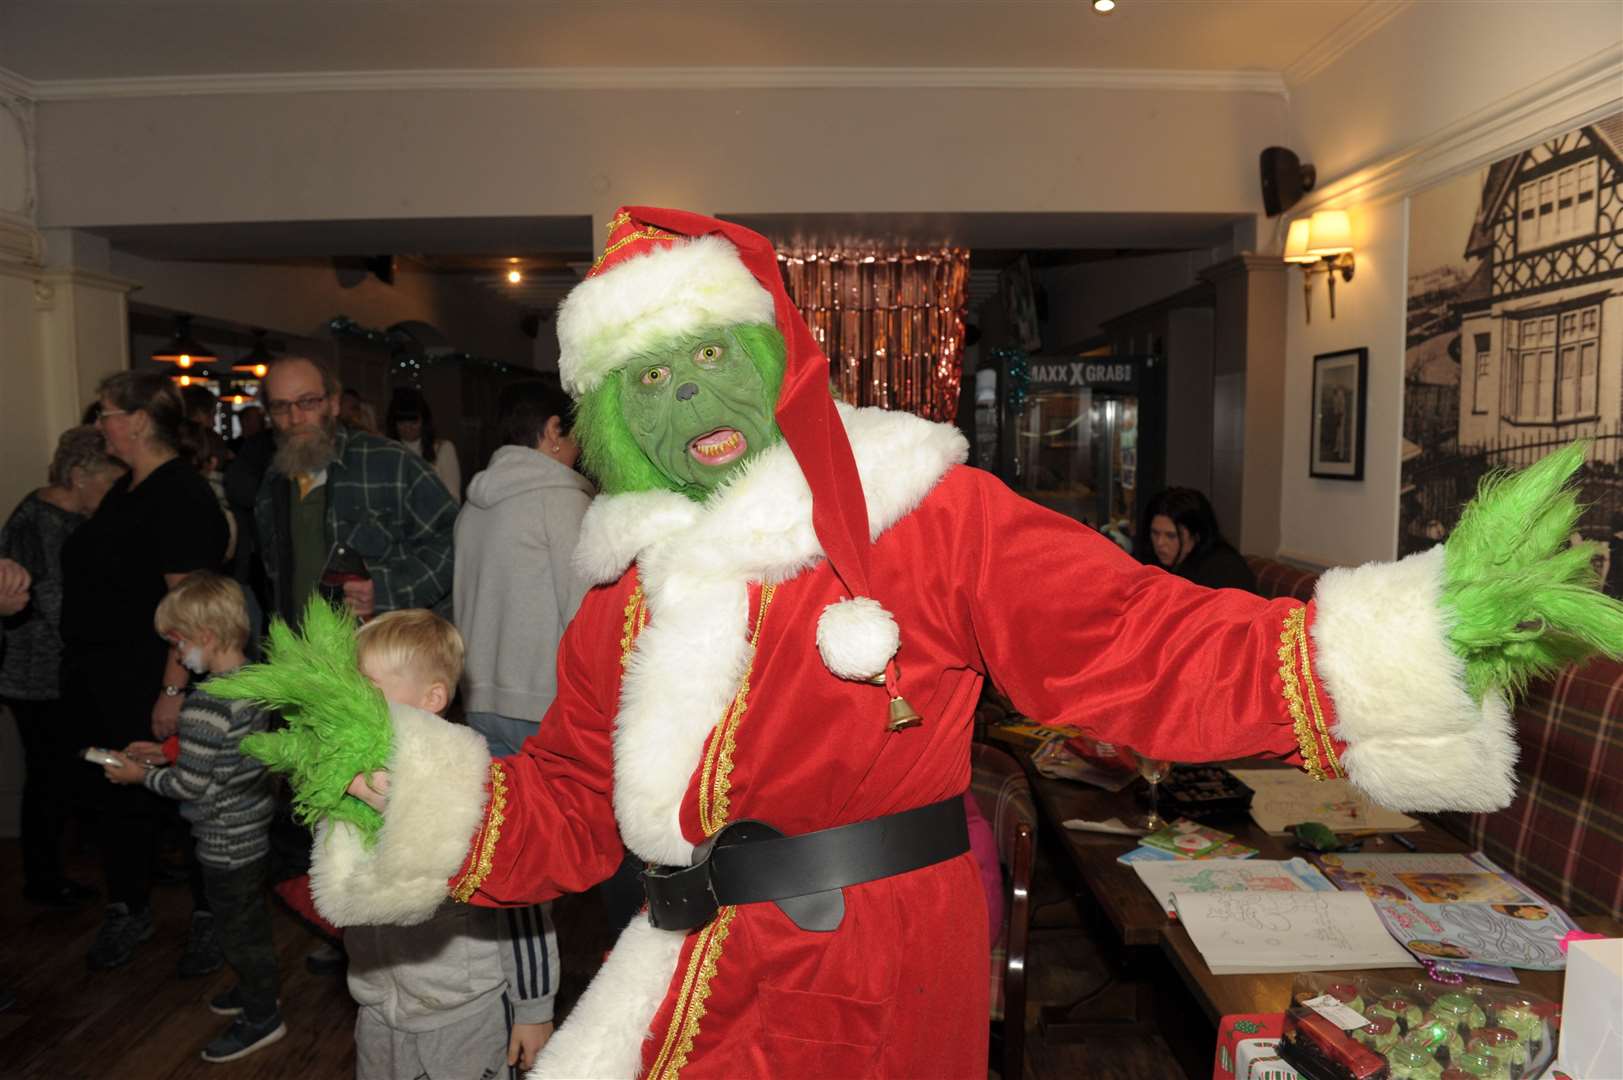 Is Boris worried about becoming The Grinch who stole Christmas? Picture: Steve Crispe